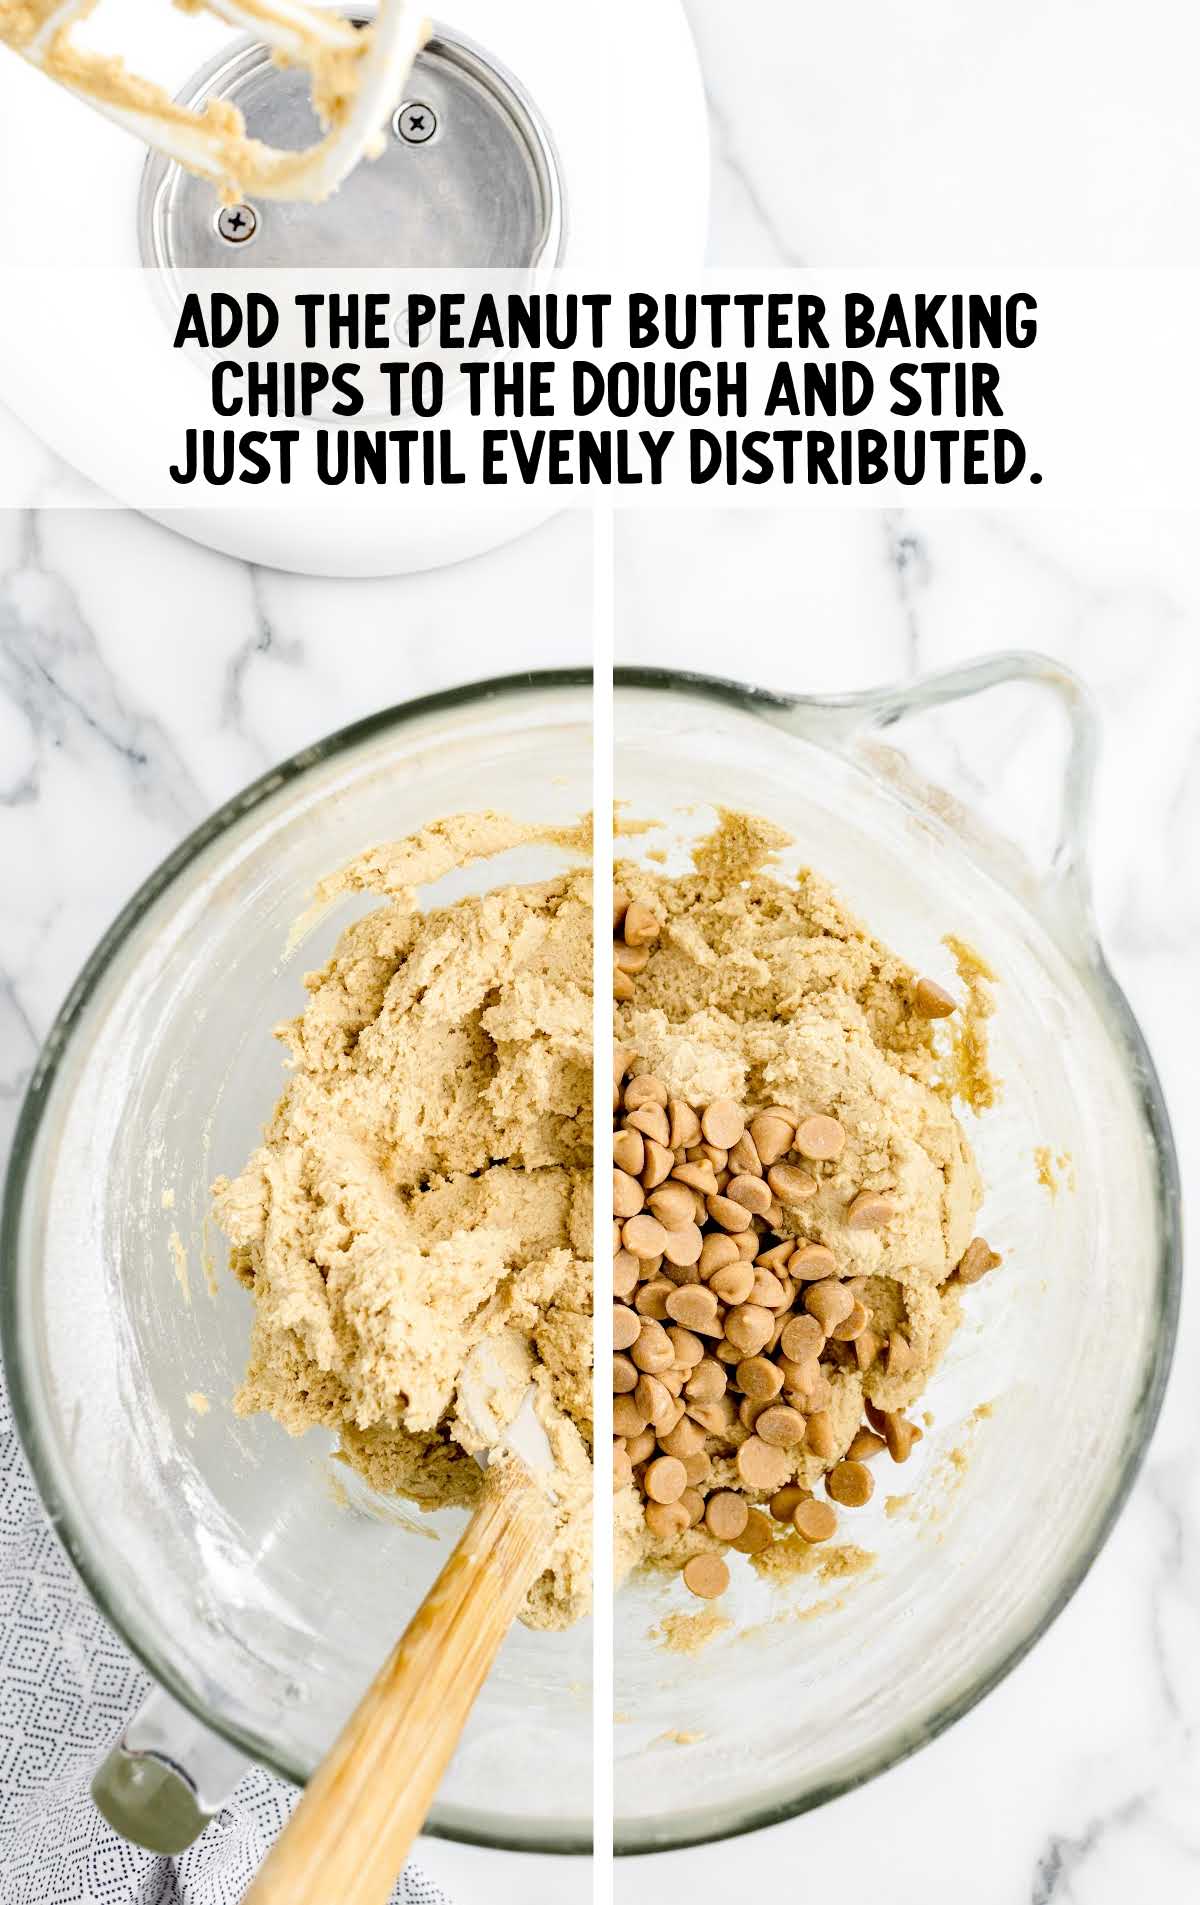 peanut butter baking chips added to the dough and stirred in a bowl